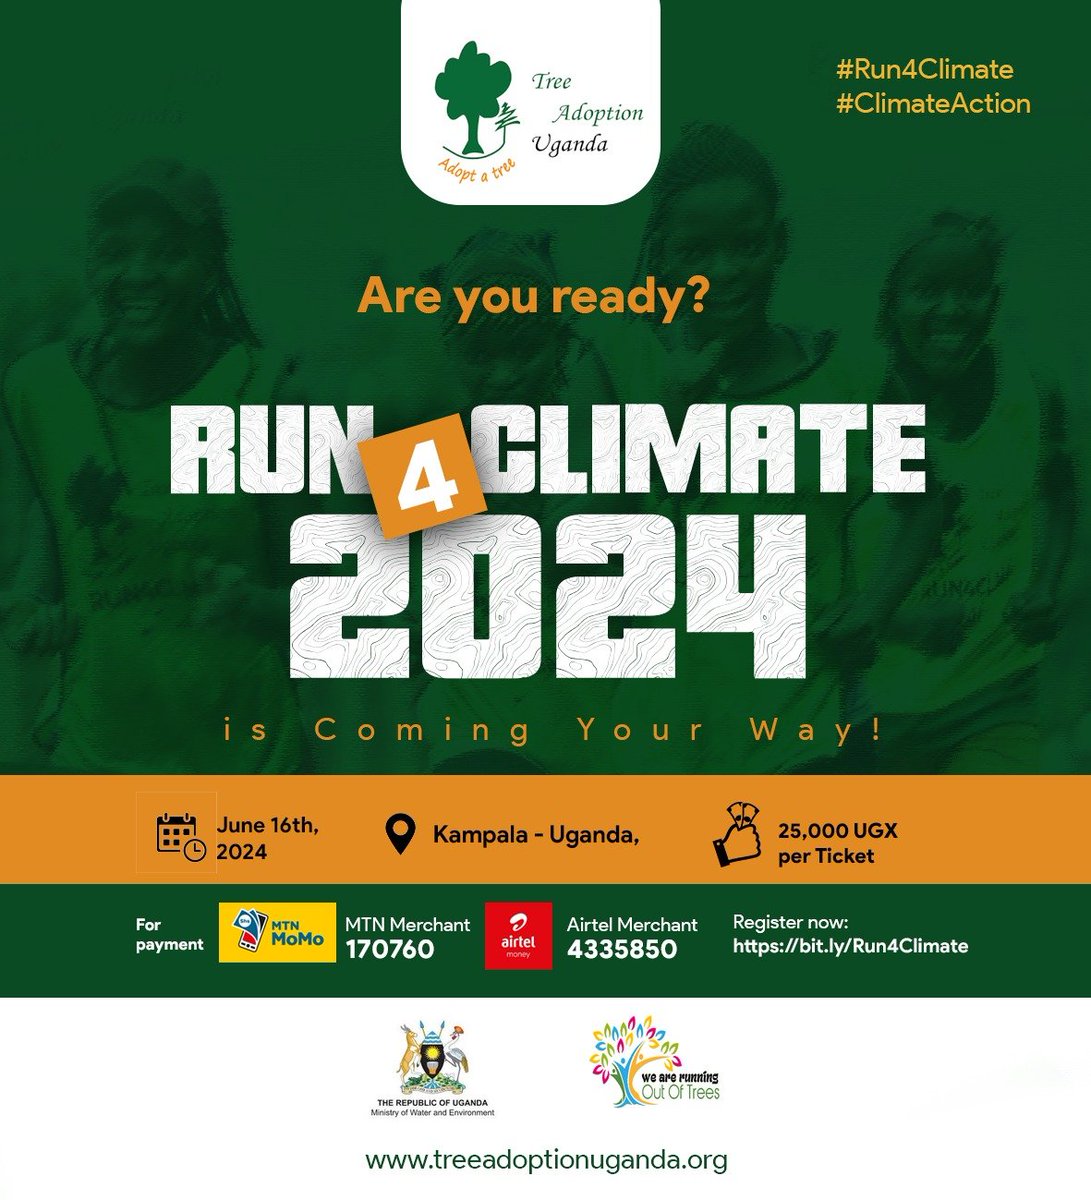 The D-day is drawing closer! Will you be among those that will respond to the earth's call on 16th June, 2024? Book your ticket at only 25k. For 25k, you and I shall be appreciated by the future generation for being good environment stewards. #Run4Climate2024 #ClimateActionNow